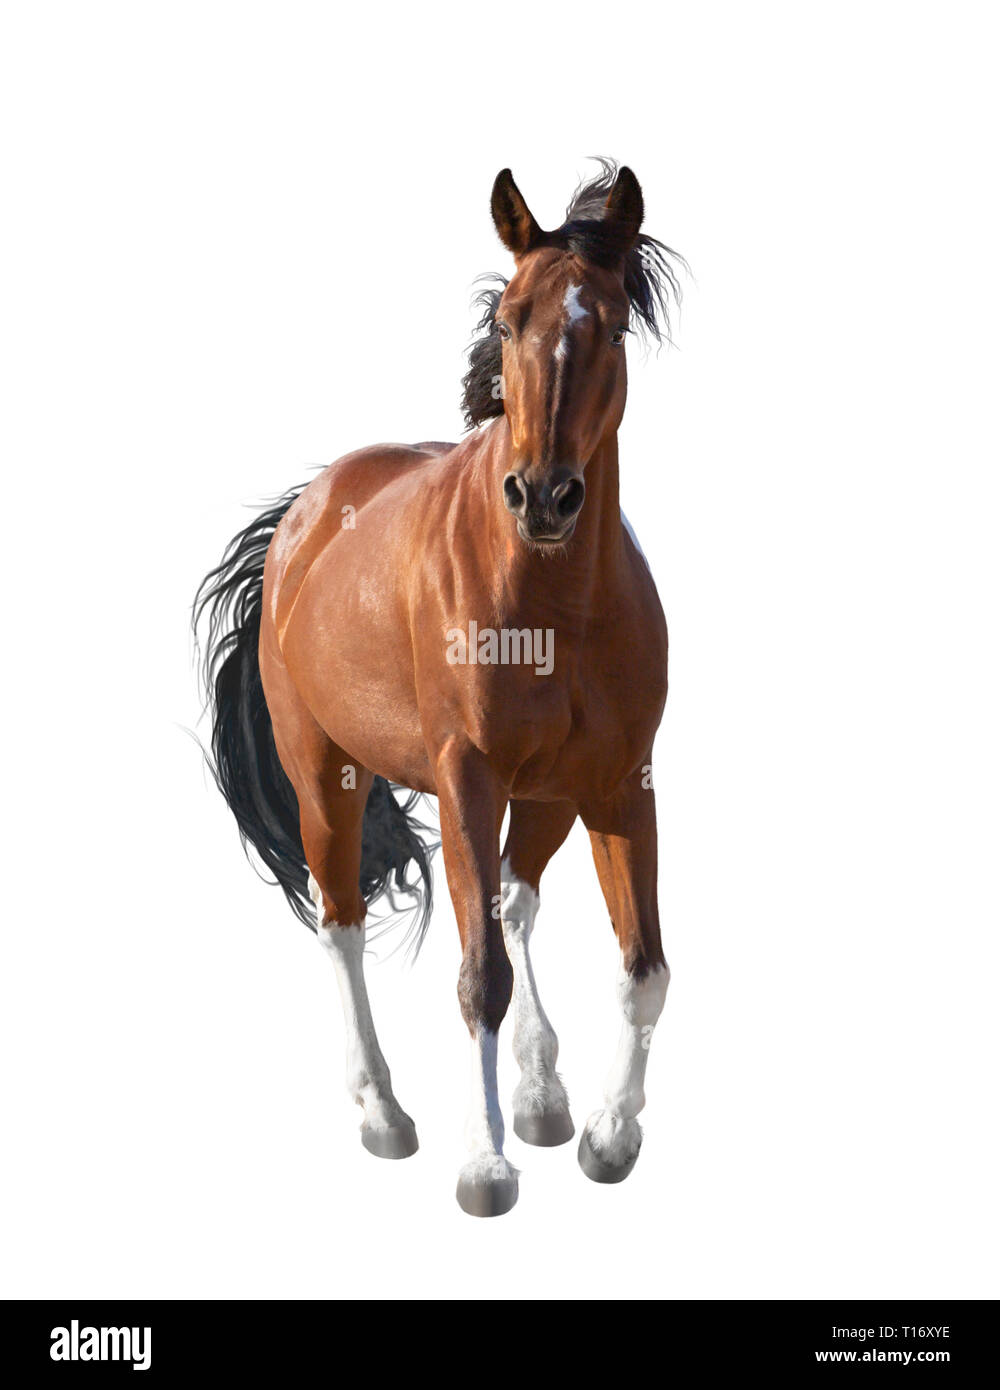 Red horse with white legs runs forward isolated on white background ...